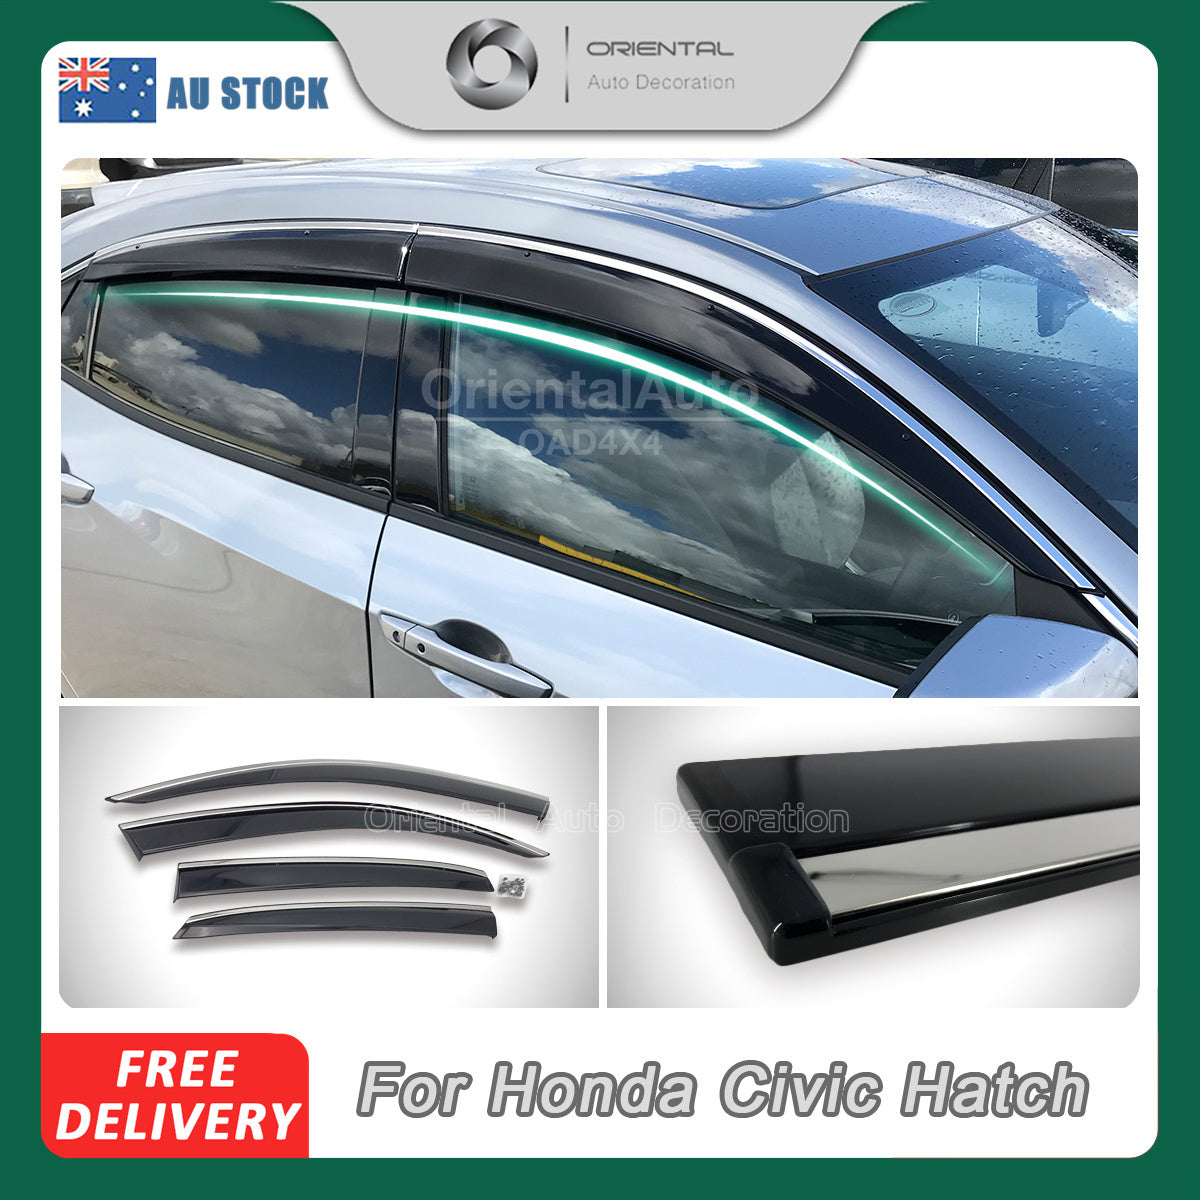 Injection Stainless Weathershields For Honda Civic Hatch 10th Gen 2017-2021 Weather Shields Window Visor